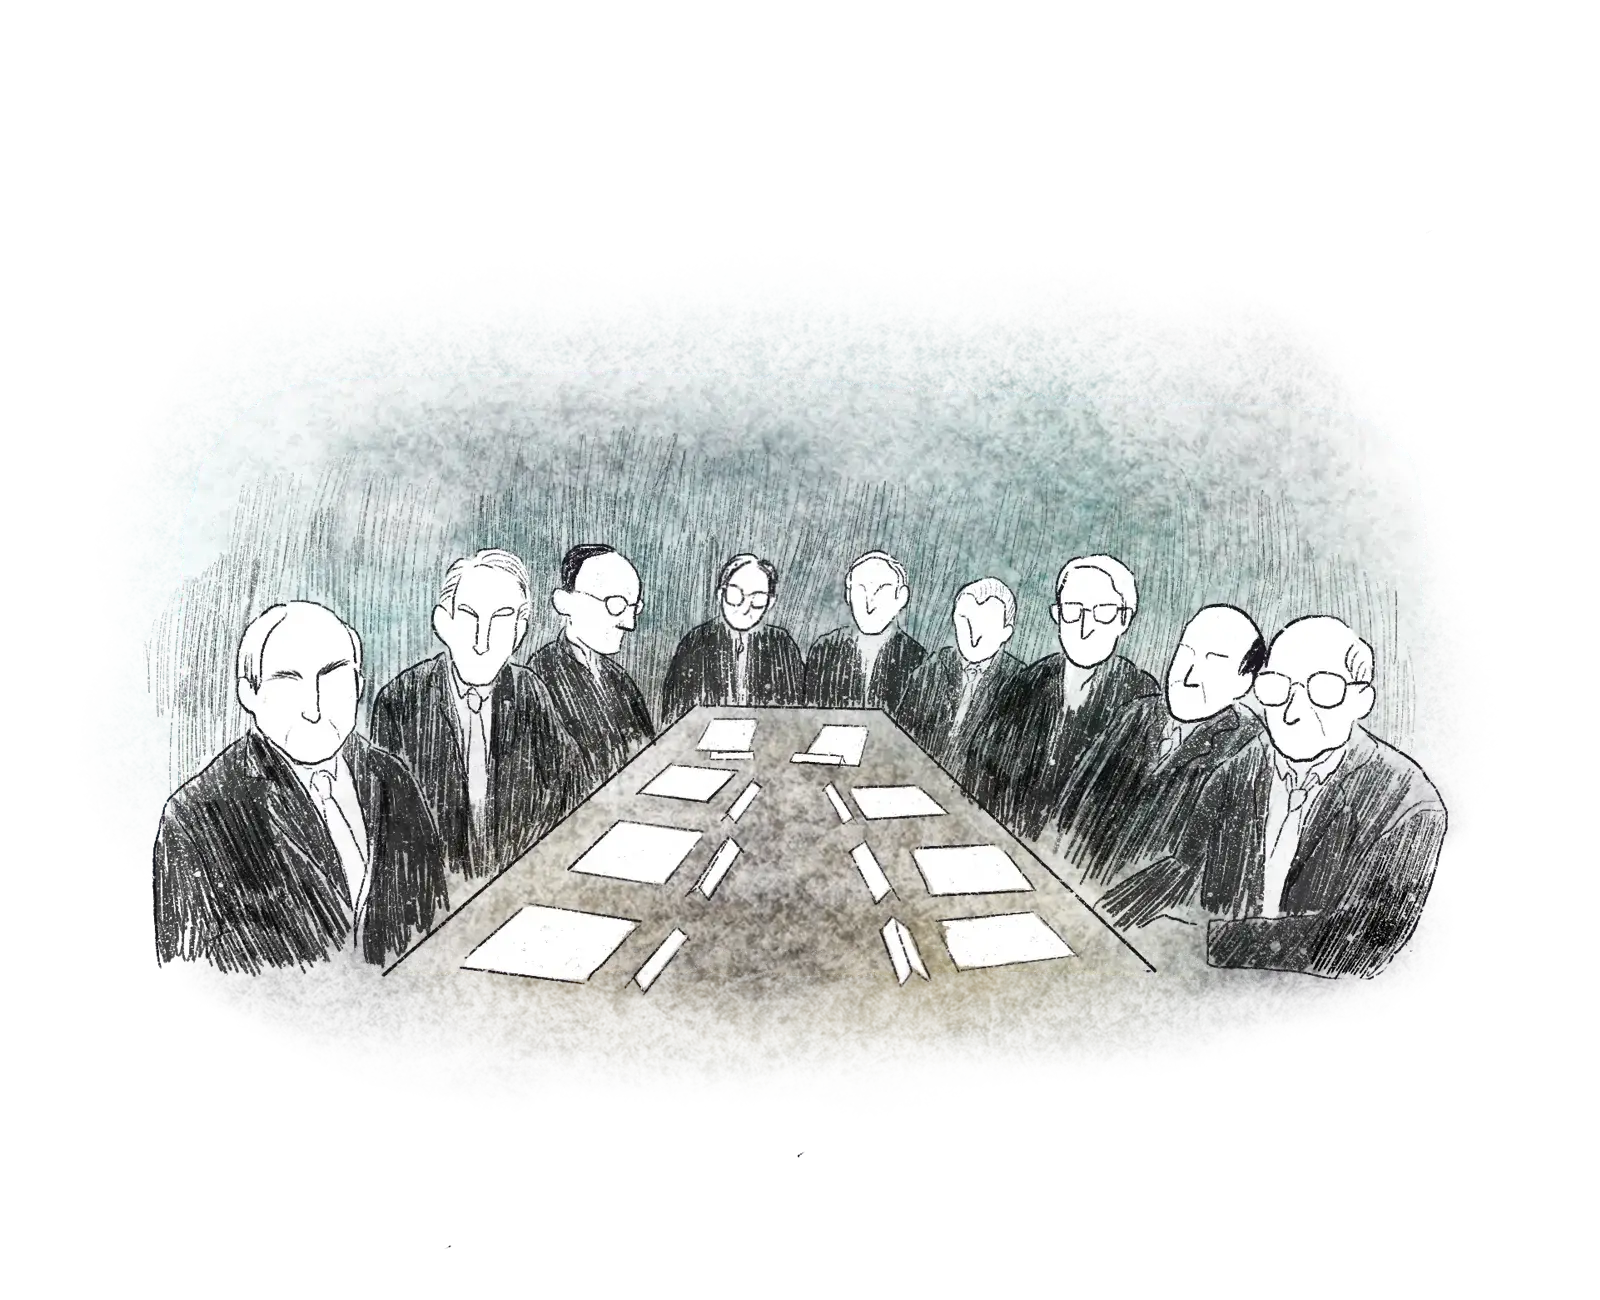 A board room filled that lacks diversity